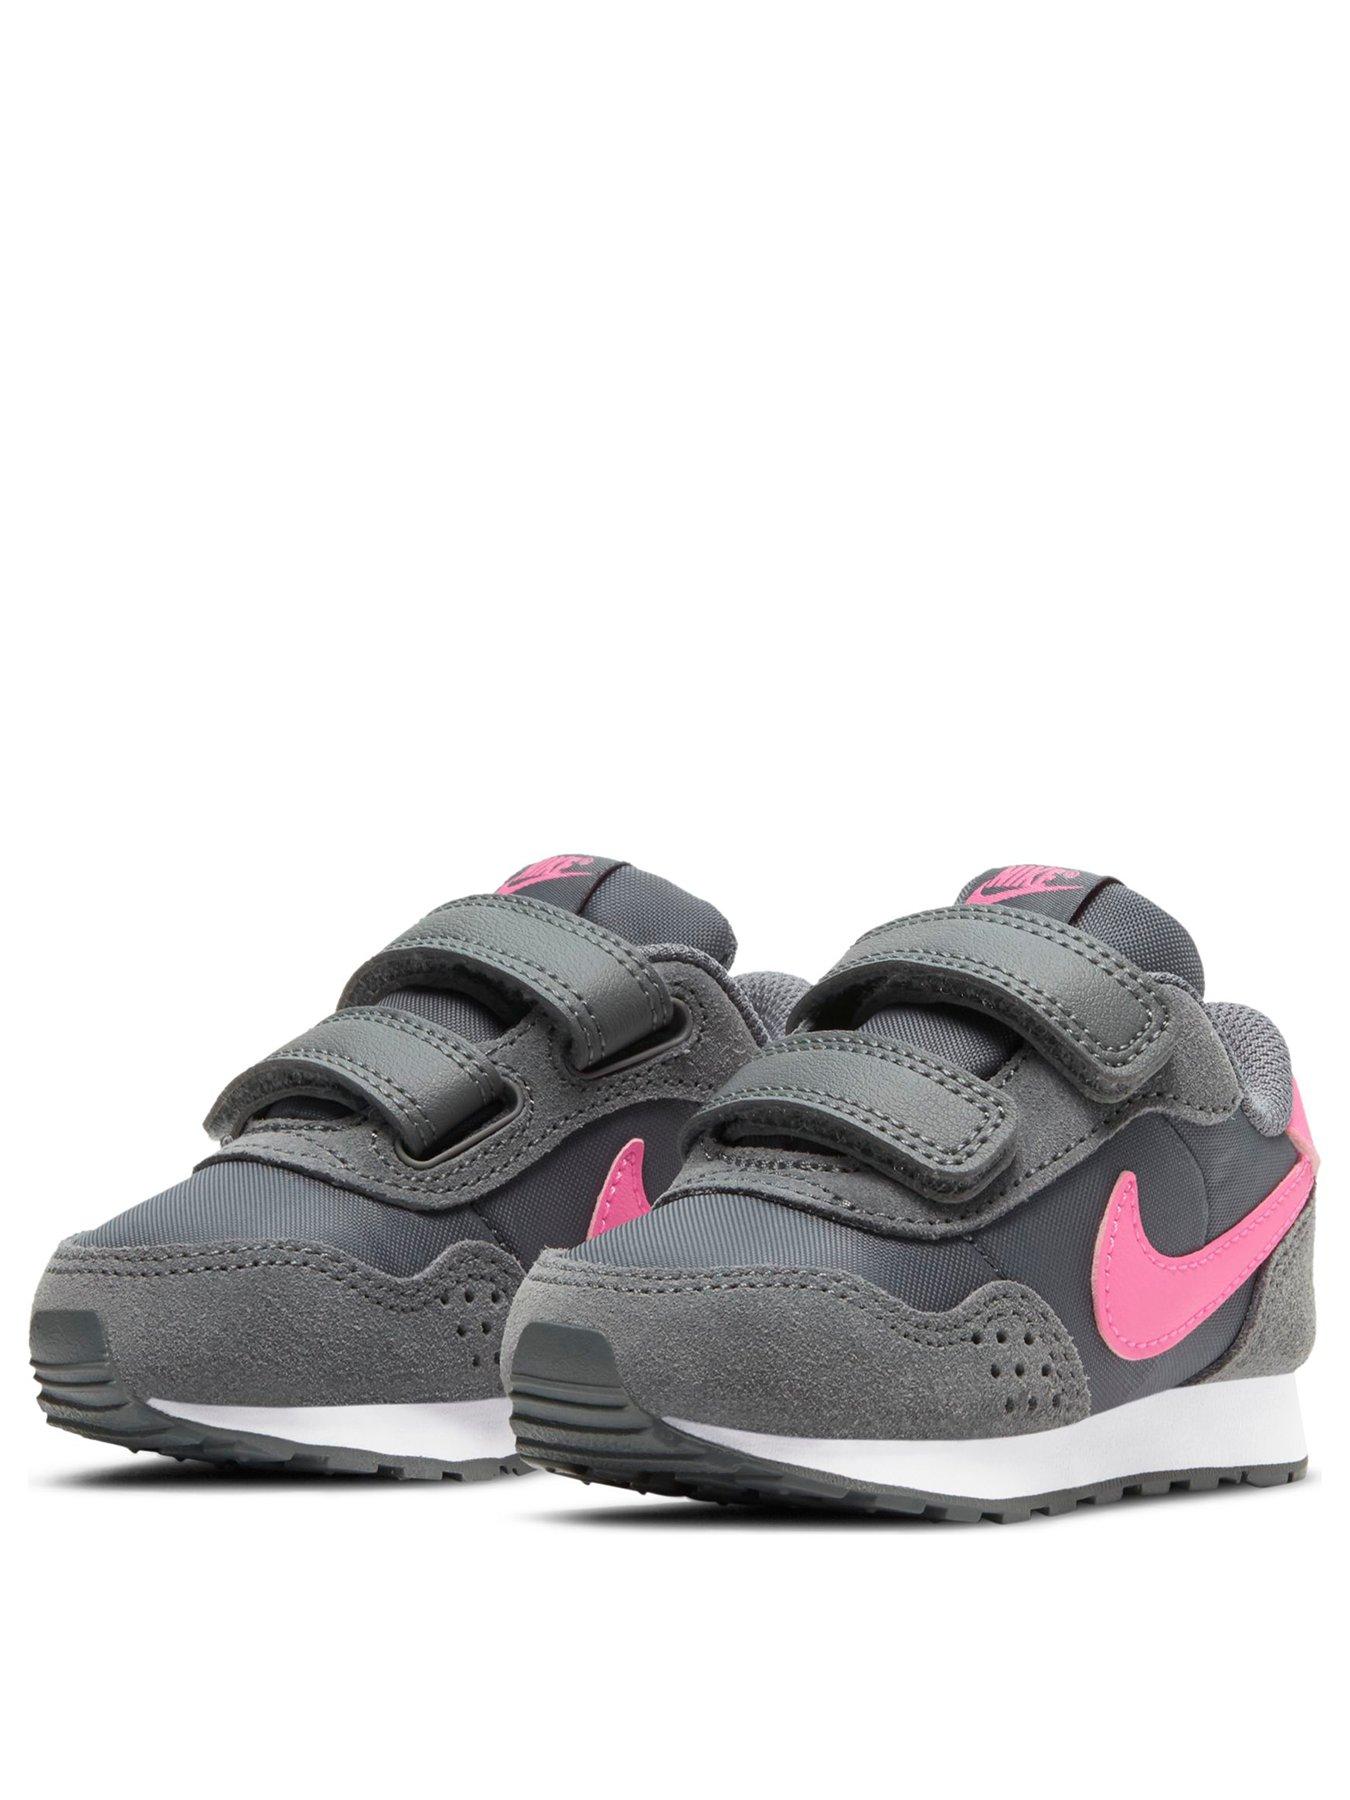 infant size 6 nike trainers